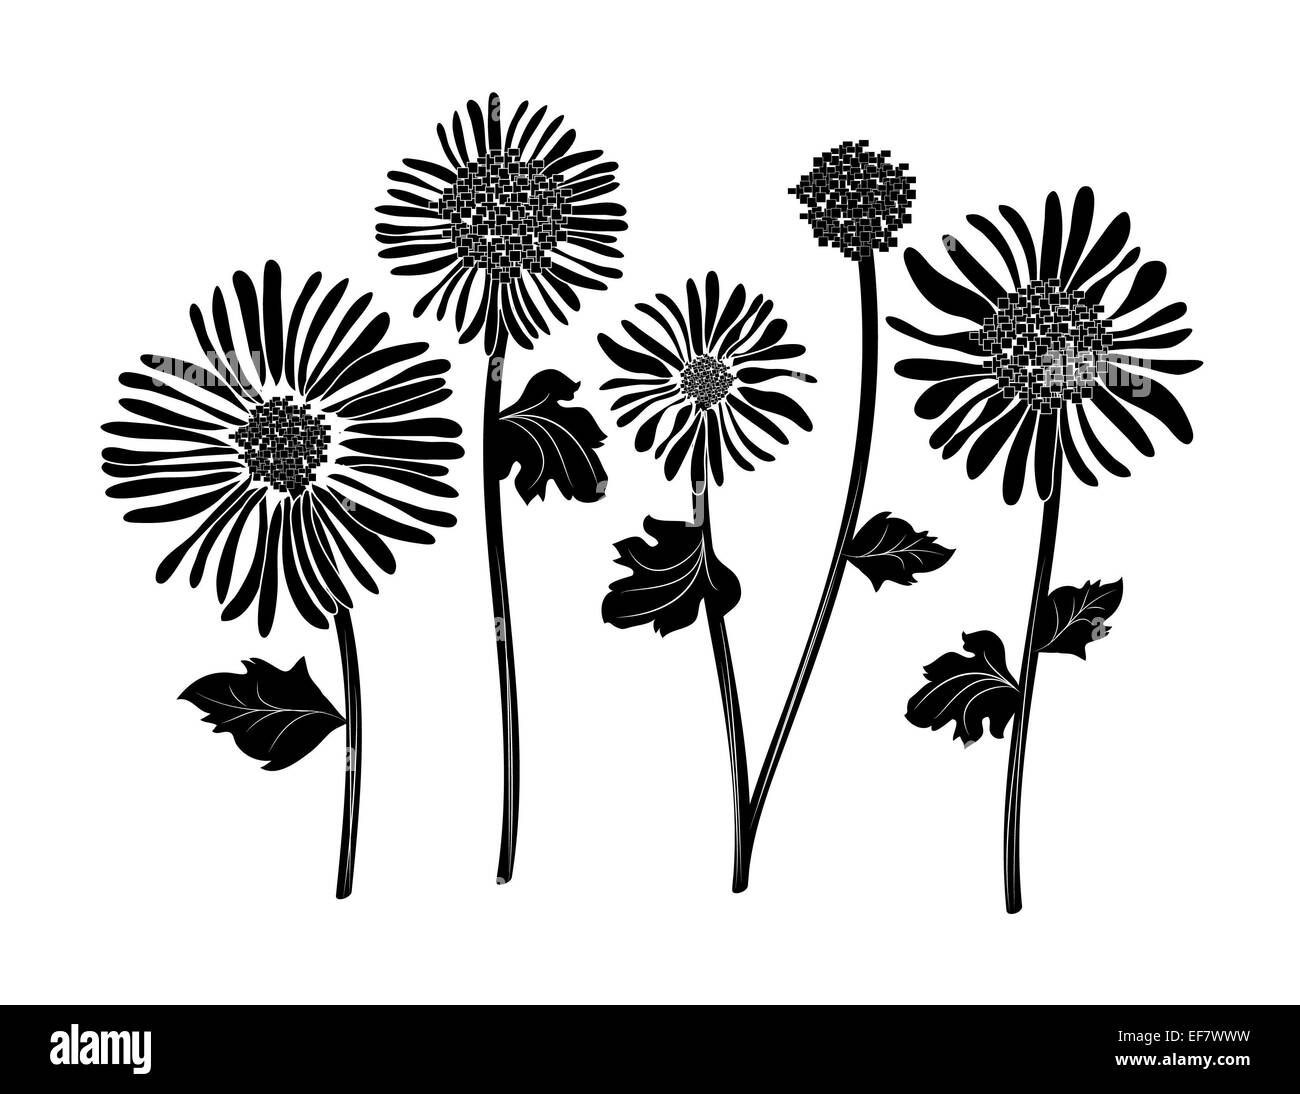 Black and white illustration of 5 happy flower petals and stems waving in the wind for decorative purposes and romantic motifs Stock Photo